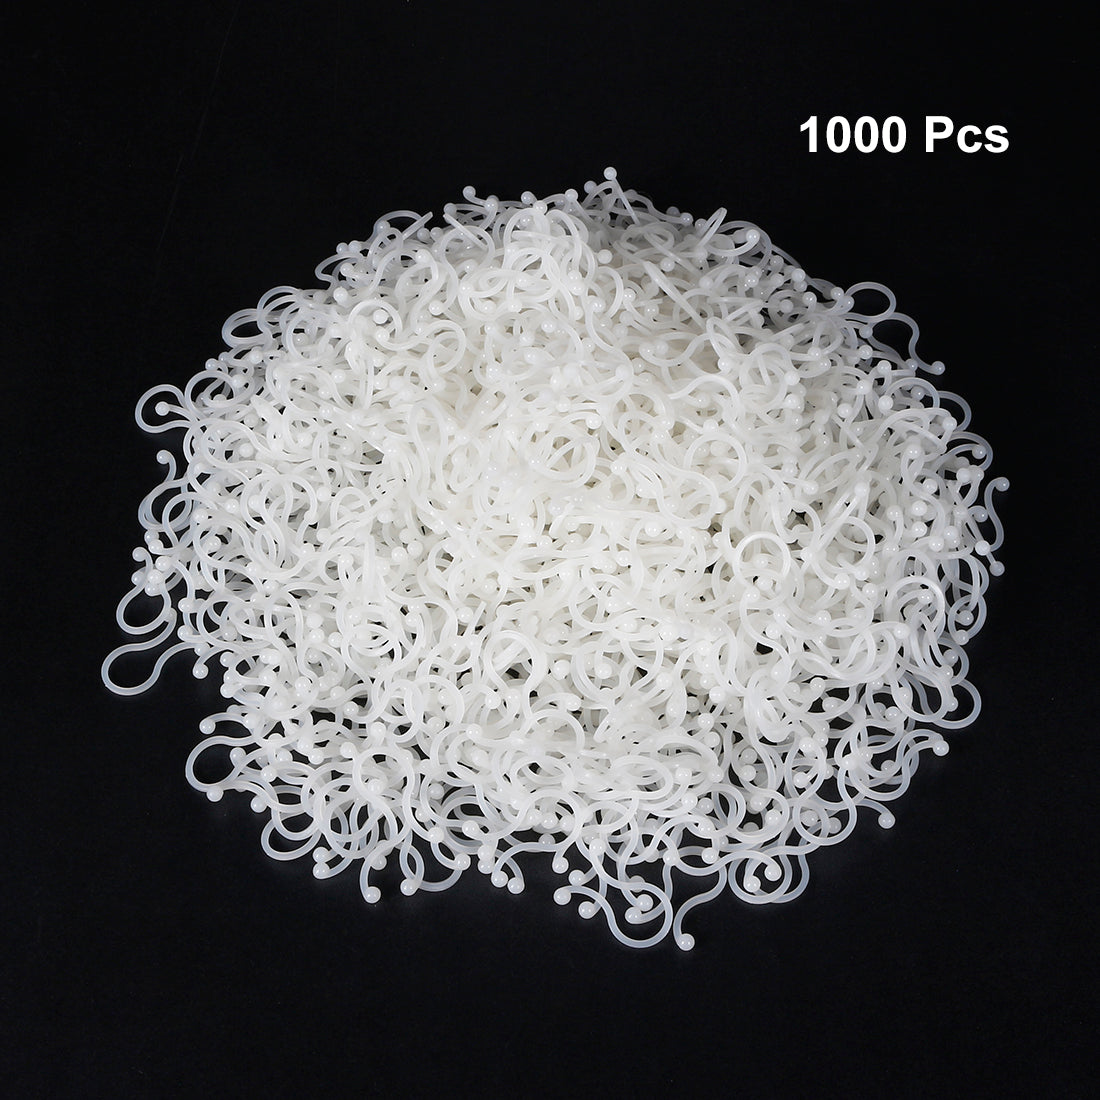 uxcell Uxcell 1000pcs Twist Lock Cable Wire Ties Nylon U Shape Save Place 12mm Dia White